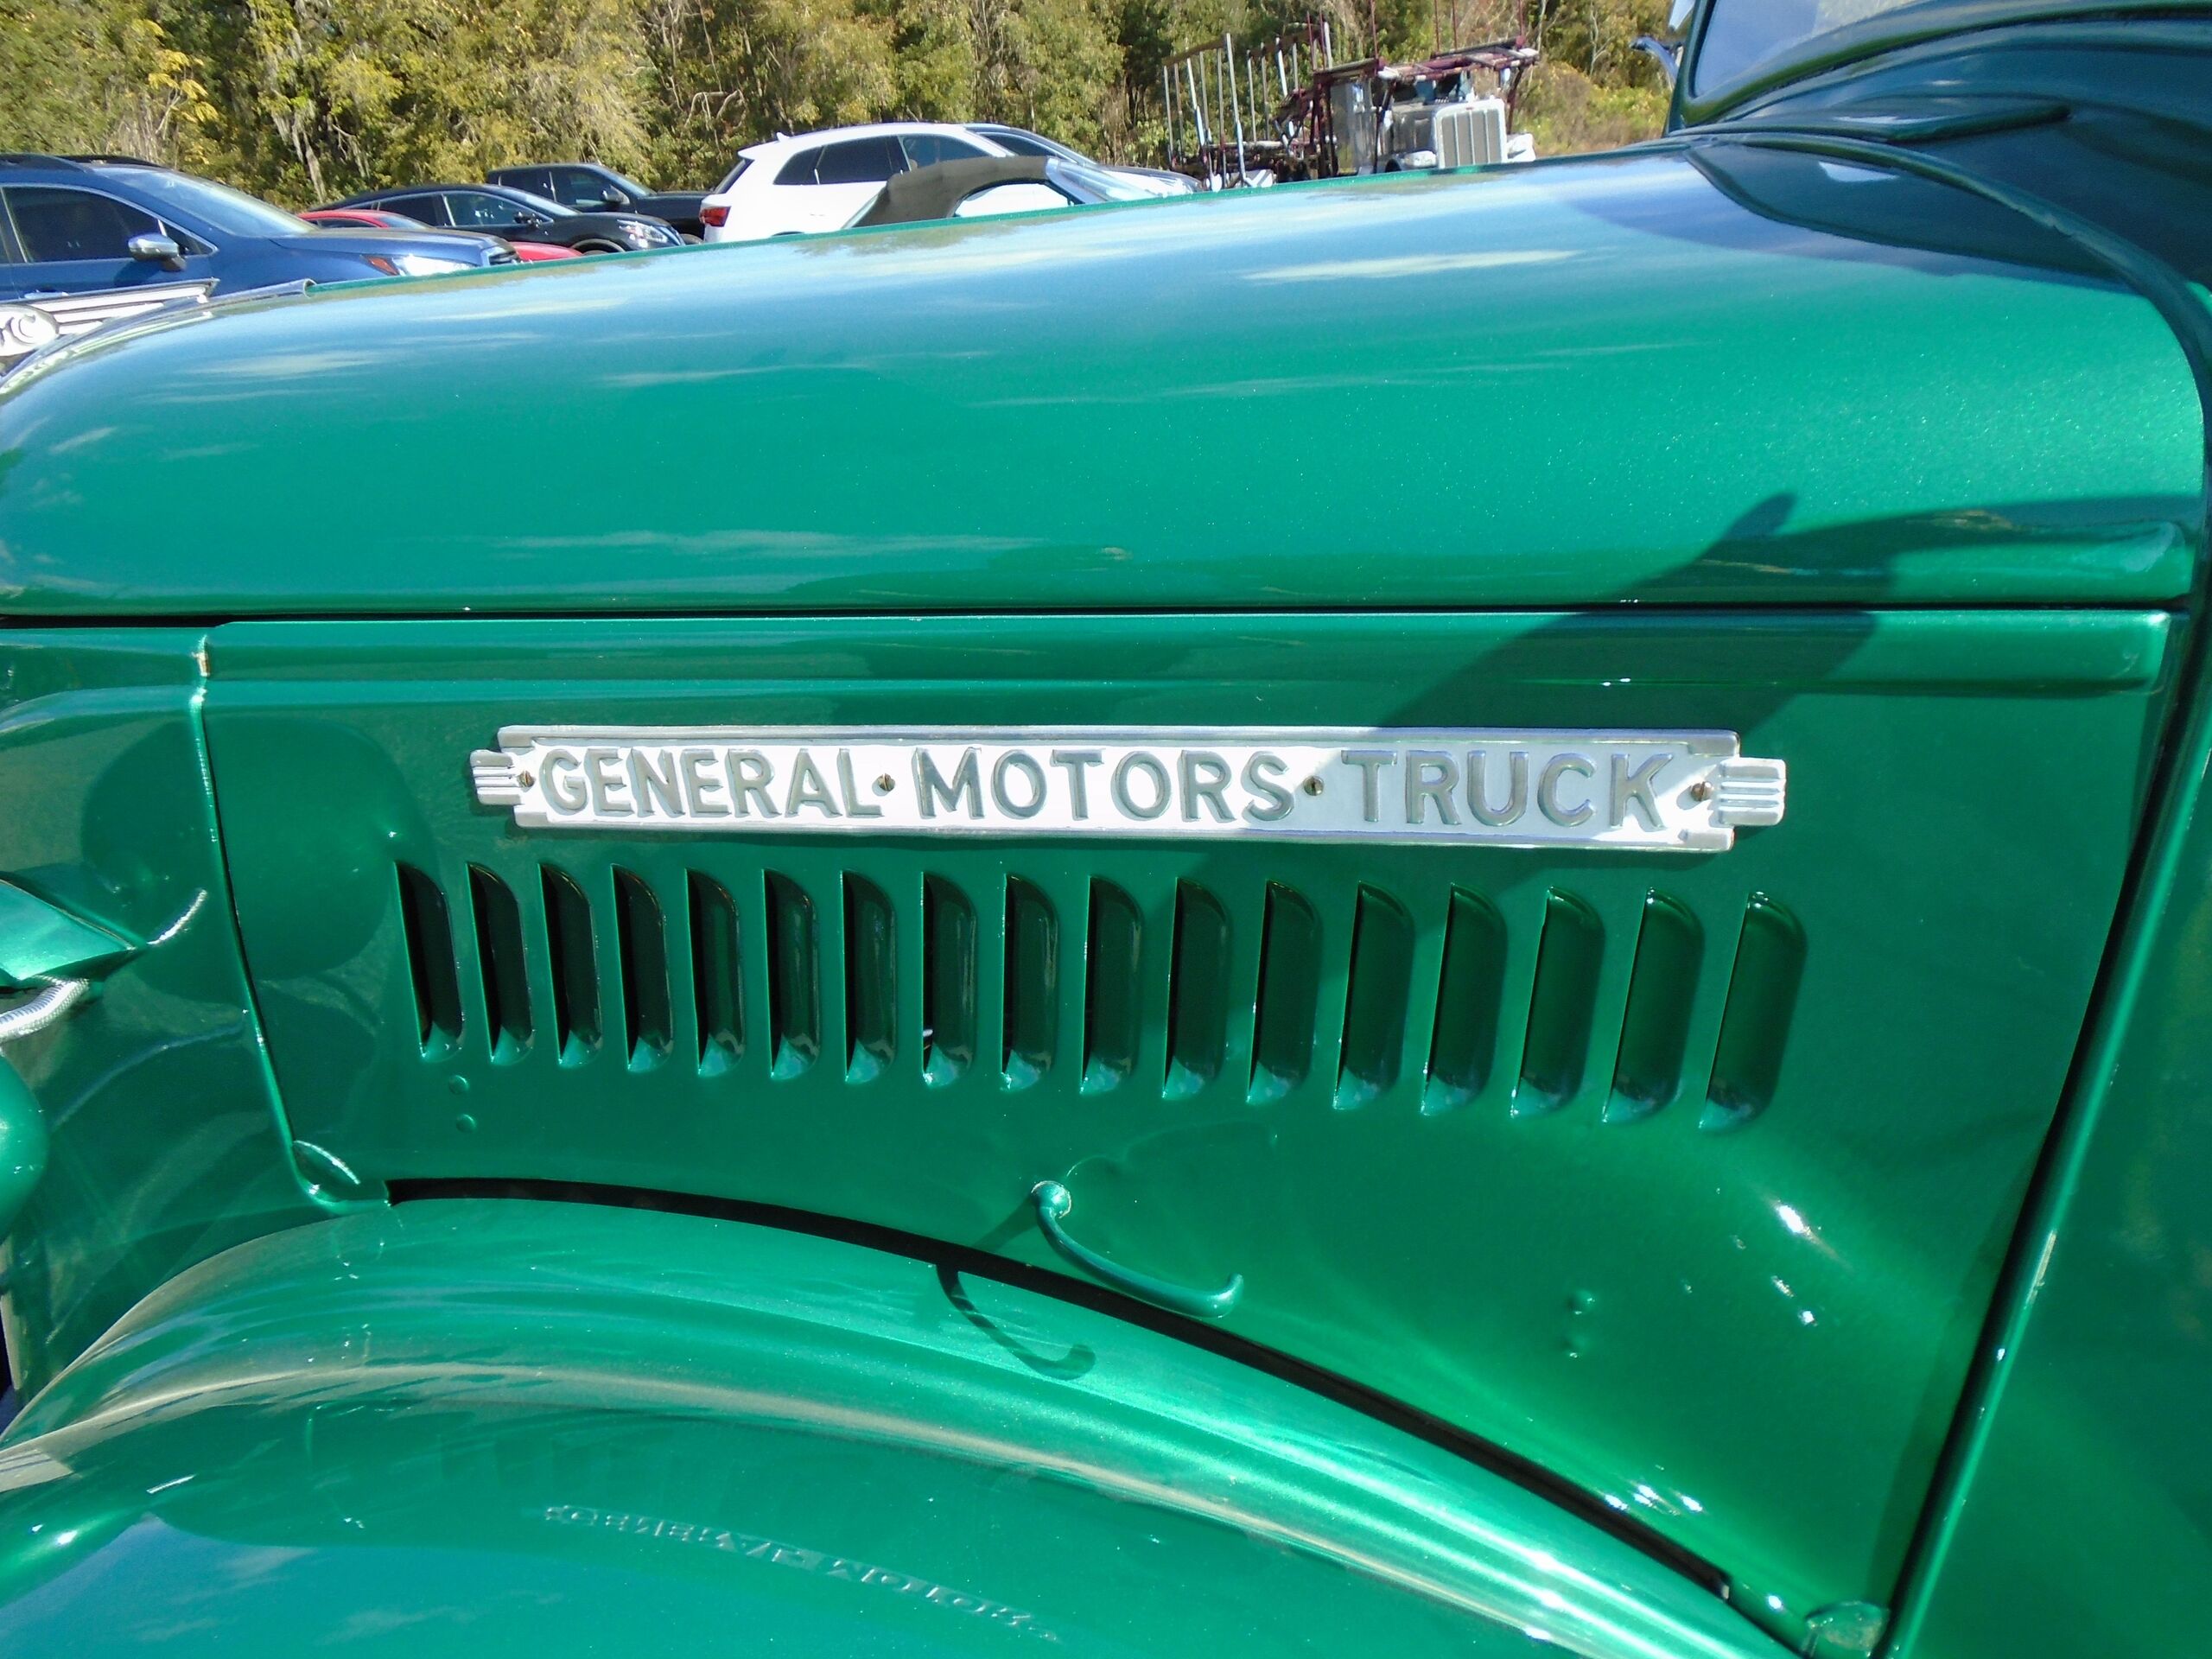 1937 GMC  Long bed  (Longbeds are rare) 10